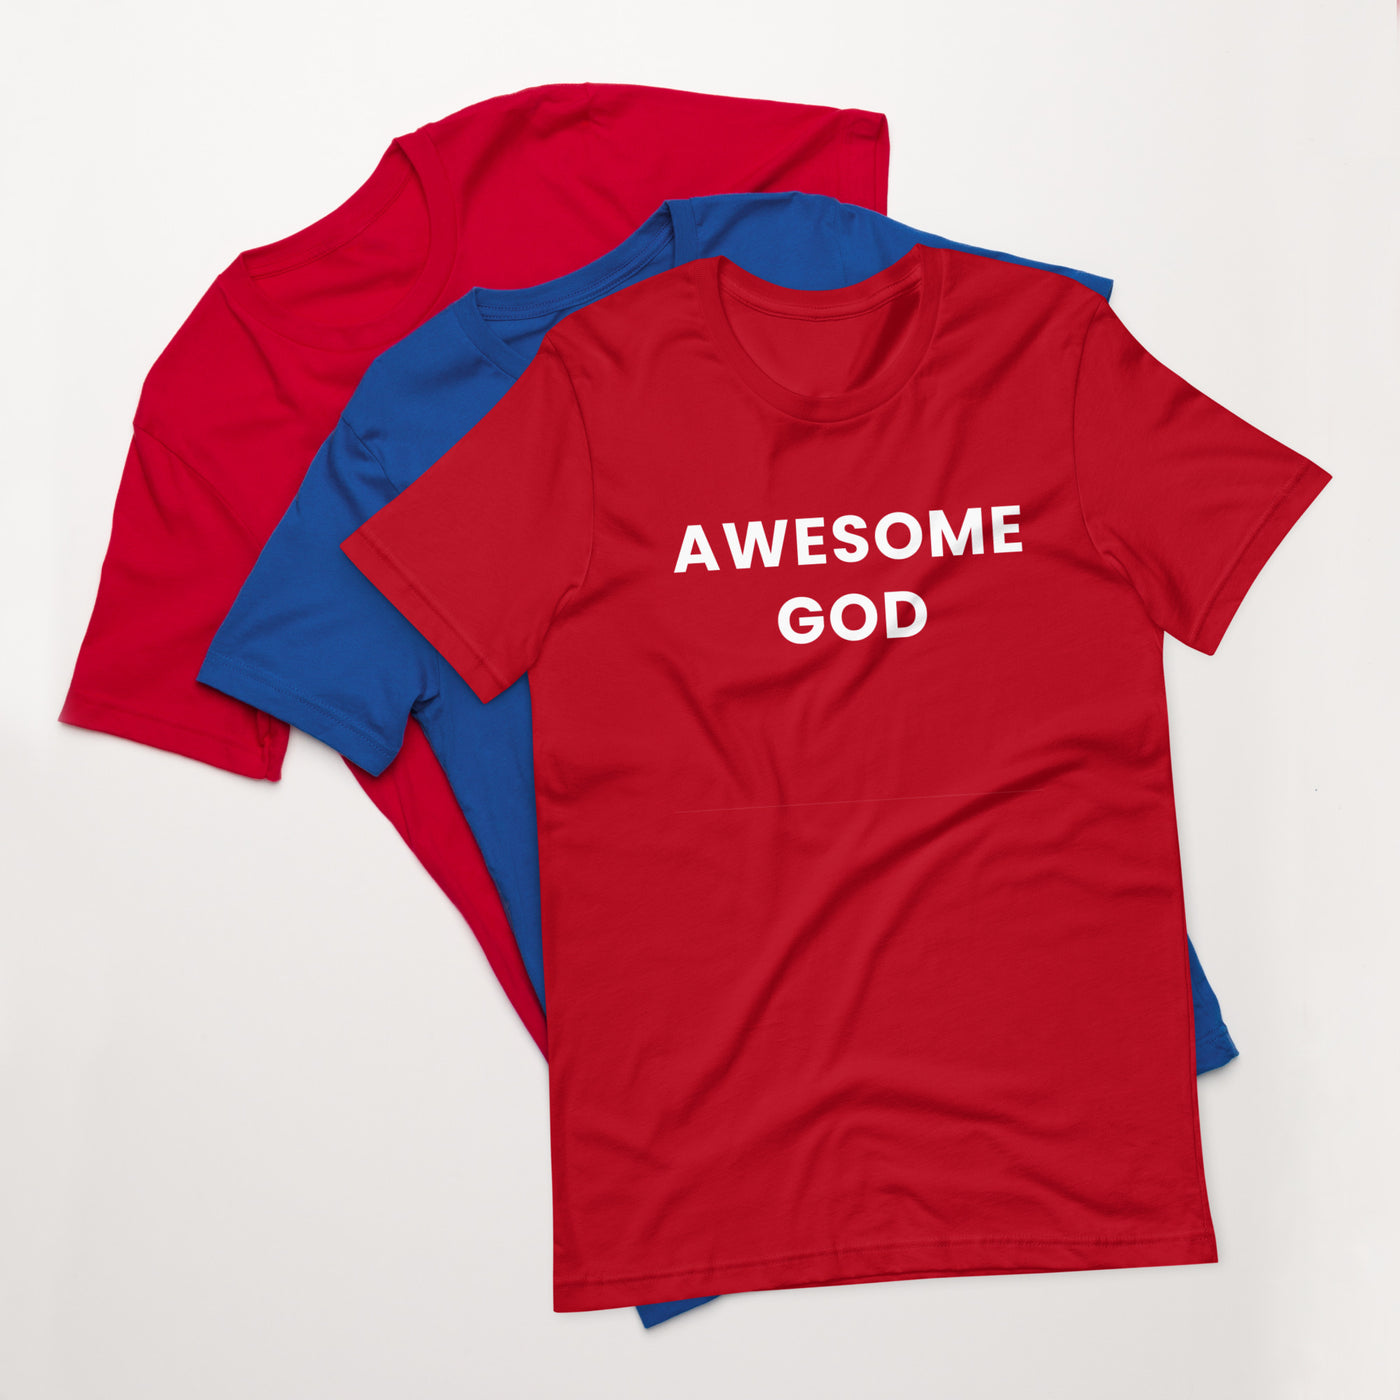 Printed T Shirts for Women | Women Tees | Faith and Happiness Store